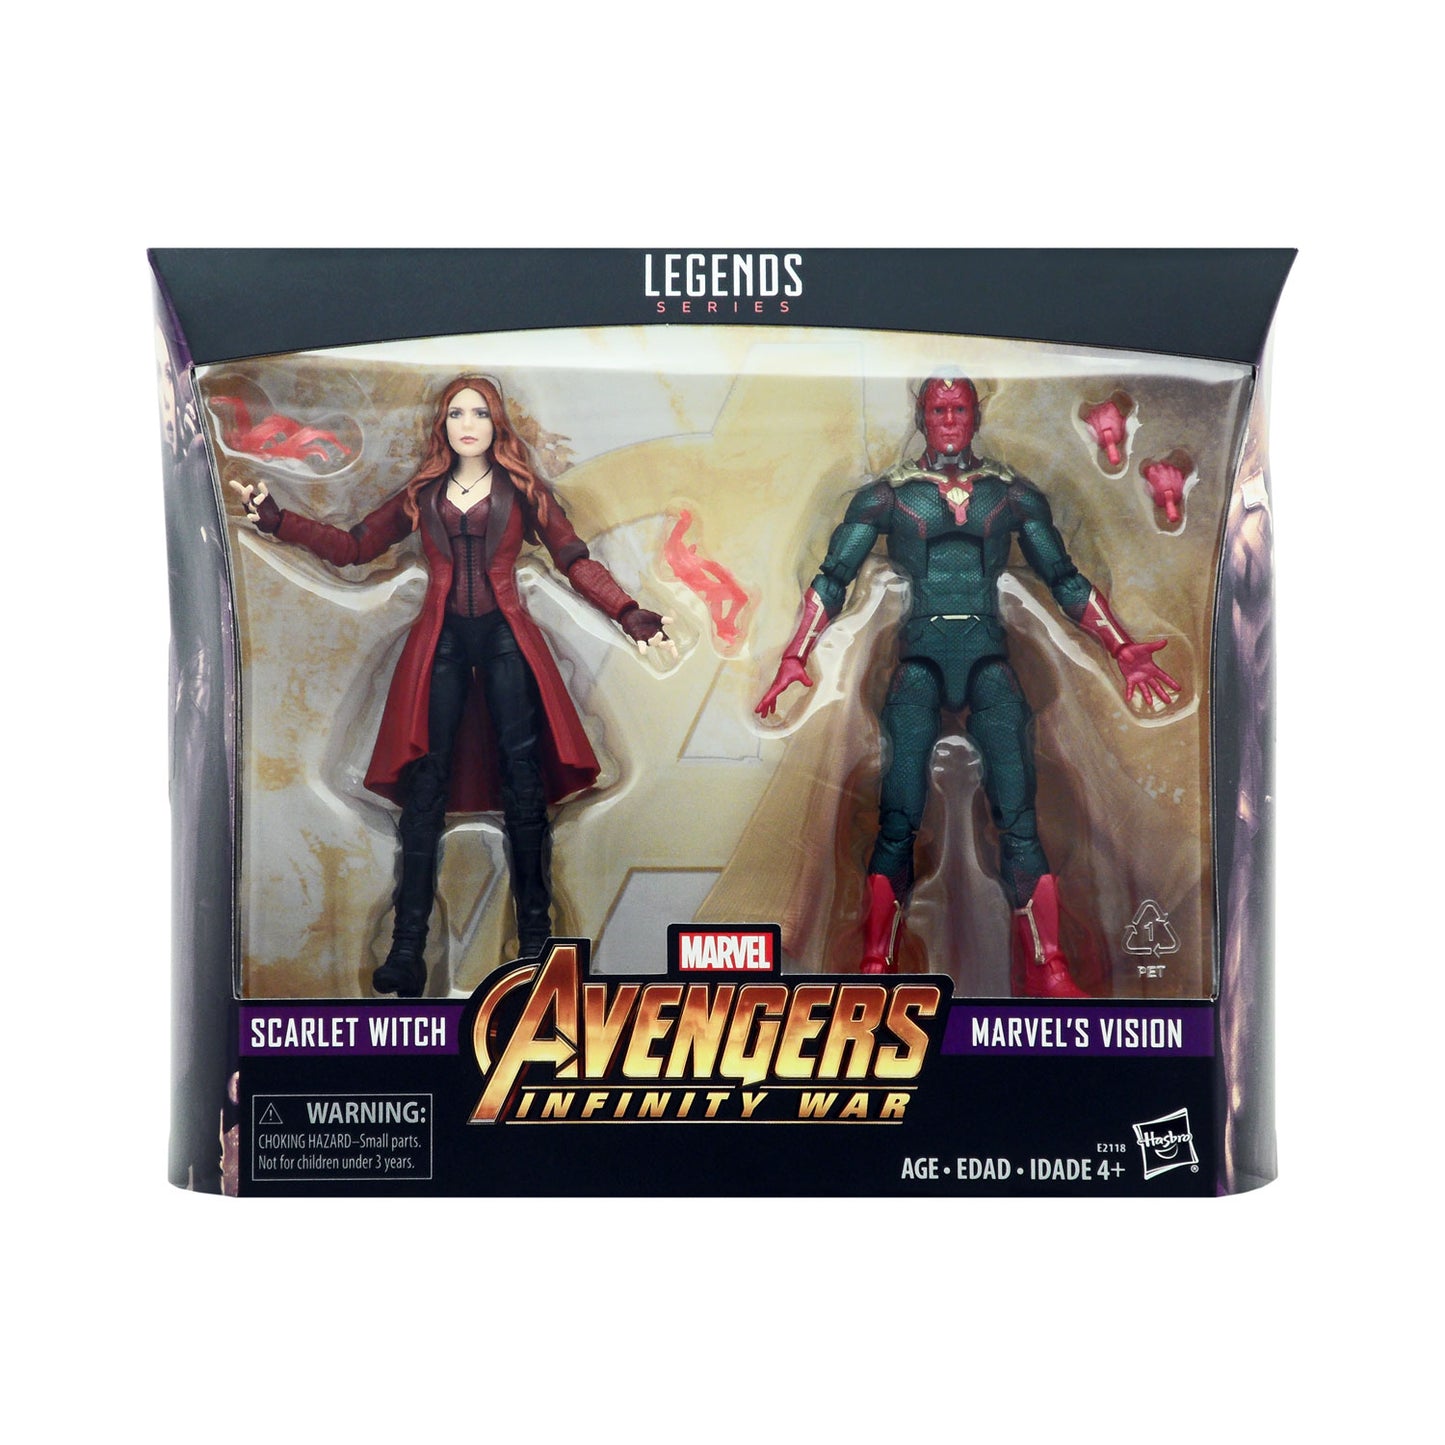 Marvel Legends Avengers Infinity War Scarlet Witch and Vision Action Figure 2-Pack